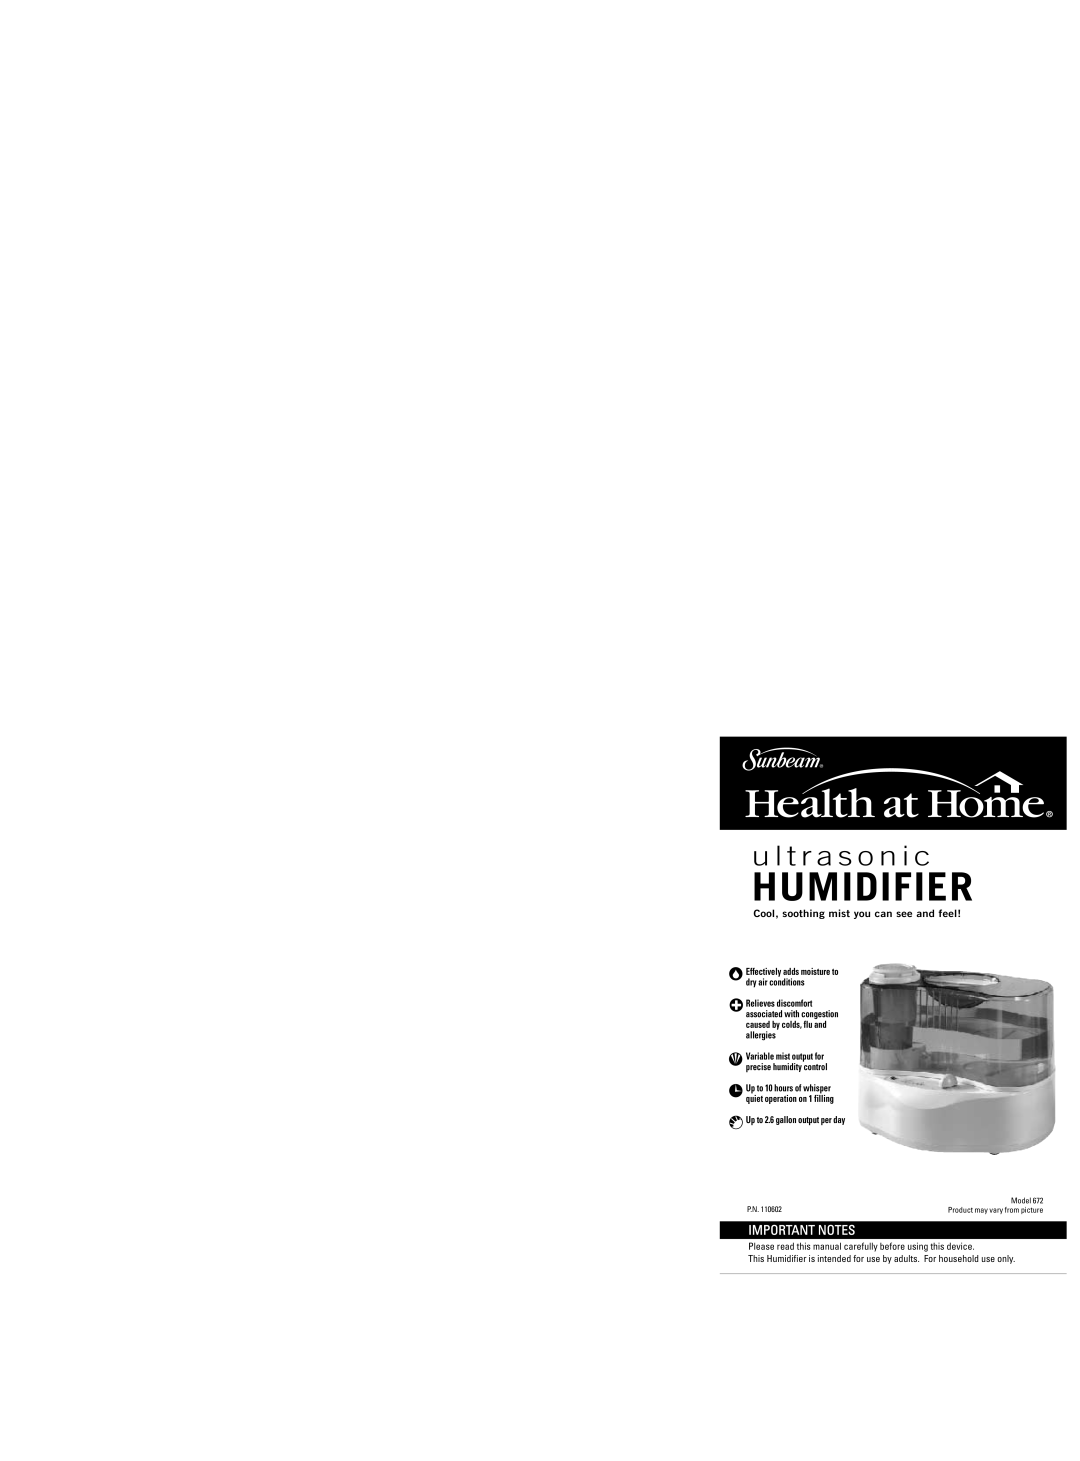 Sunbeam 672 warranty Humidifier, u l t r a s o n i c, Important Notes, Cool, soothing mist you can see and feel 